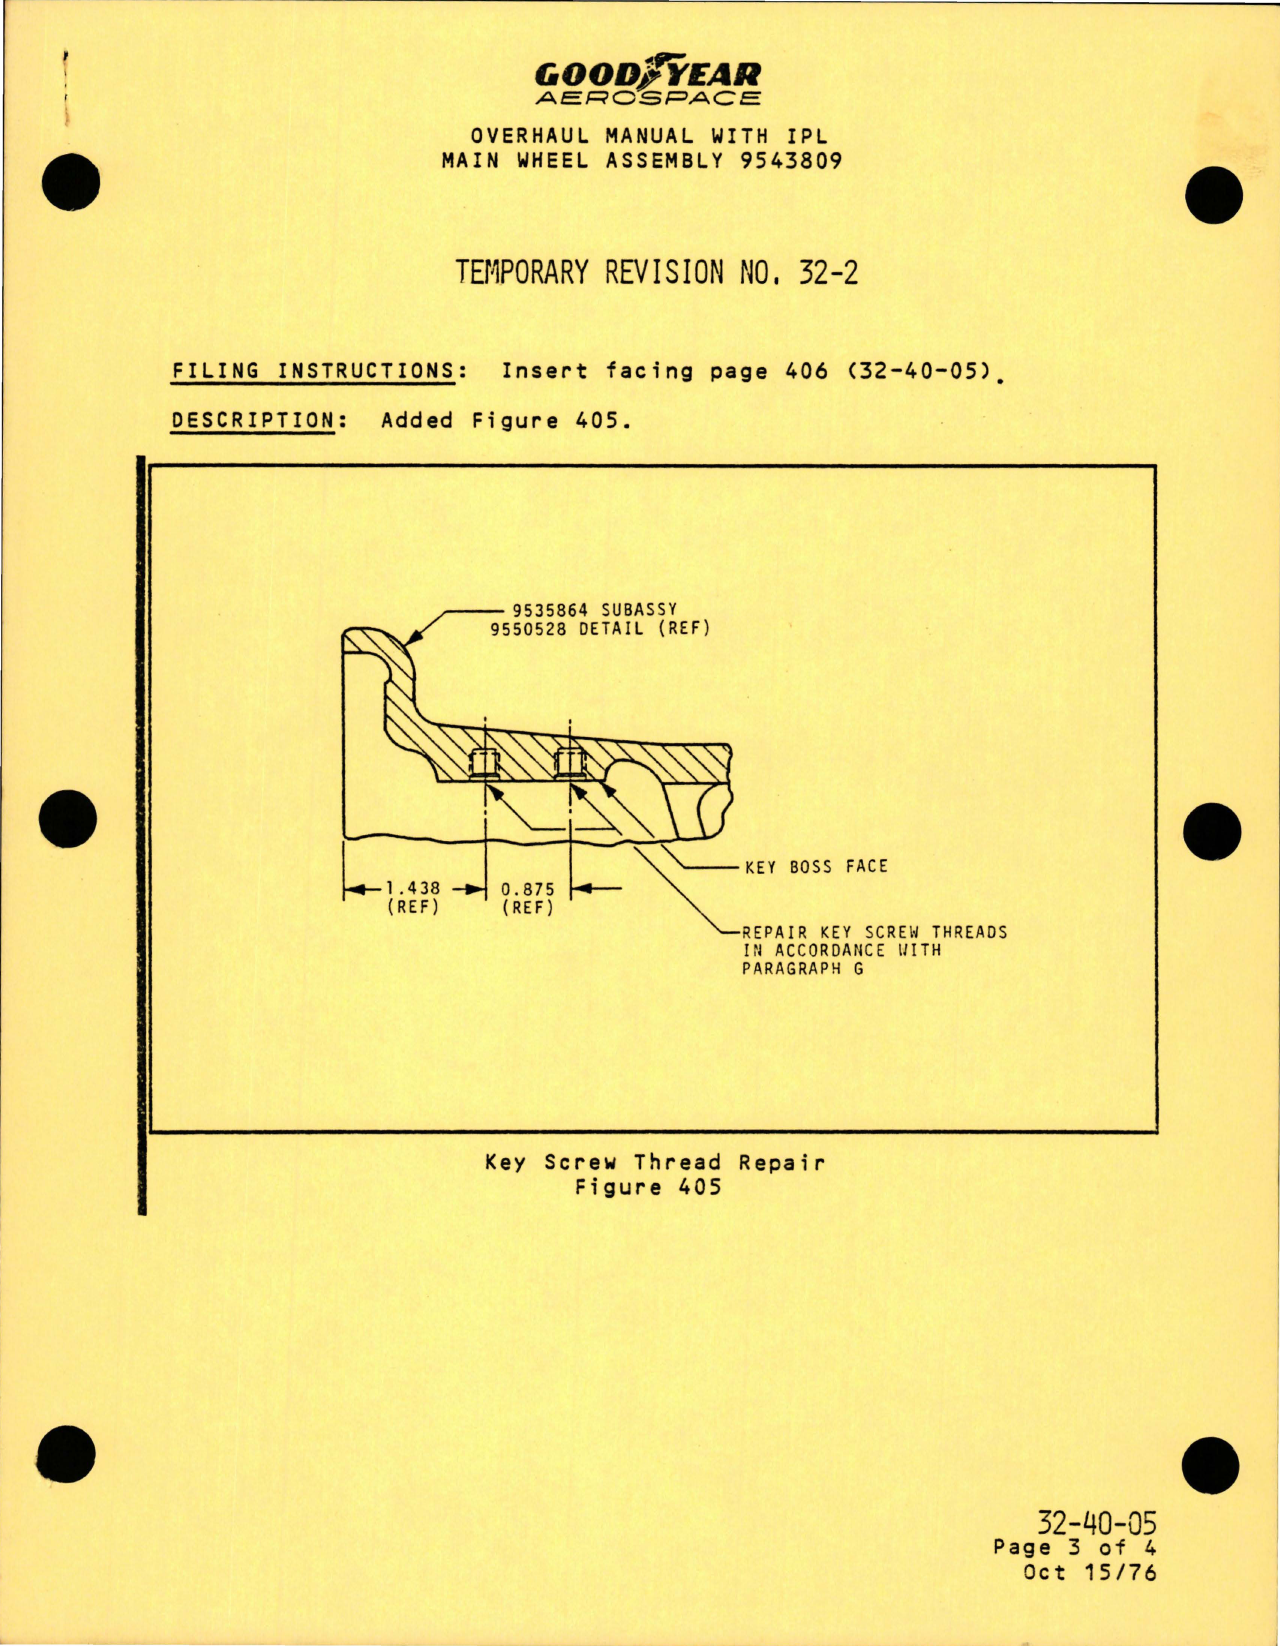 Sample page 7 from AirCorps Library document: Overhaul with Illustrated Parts List for Nose Wheel, Main Wheel, and Brake Assemblies